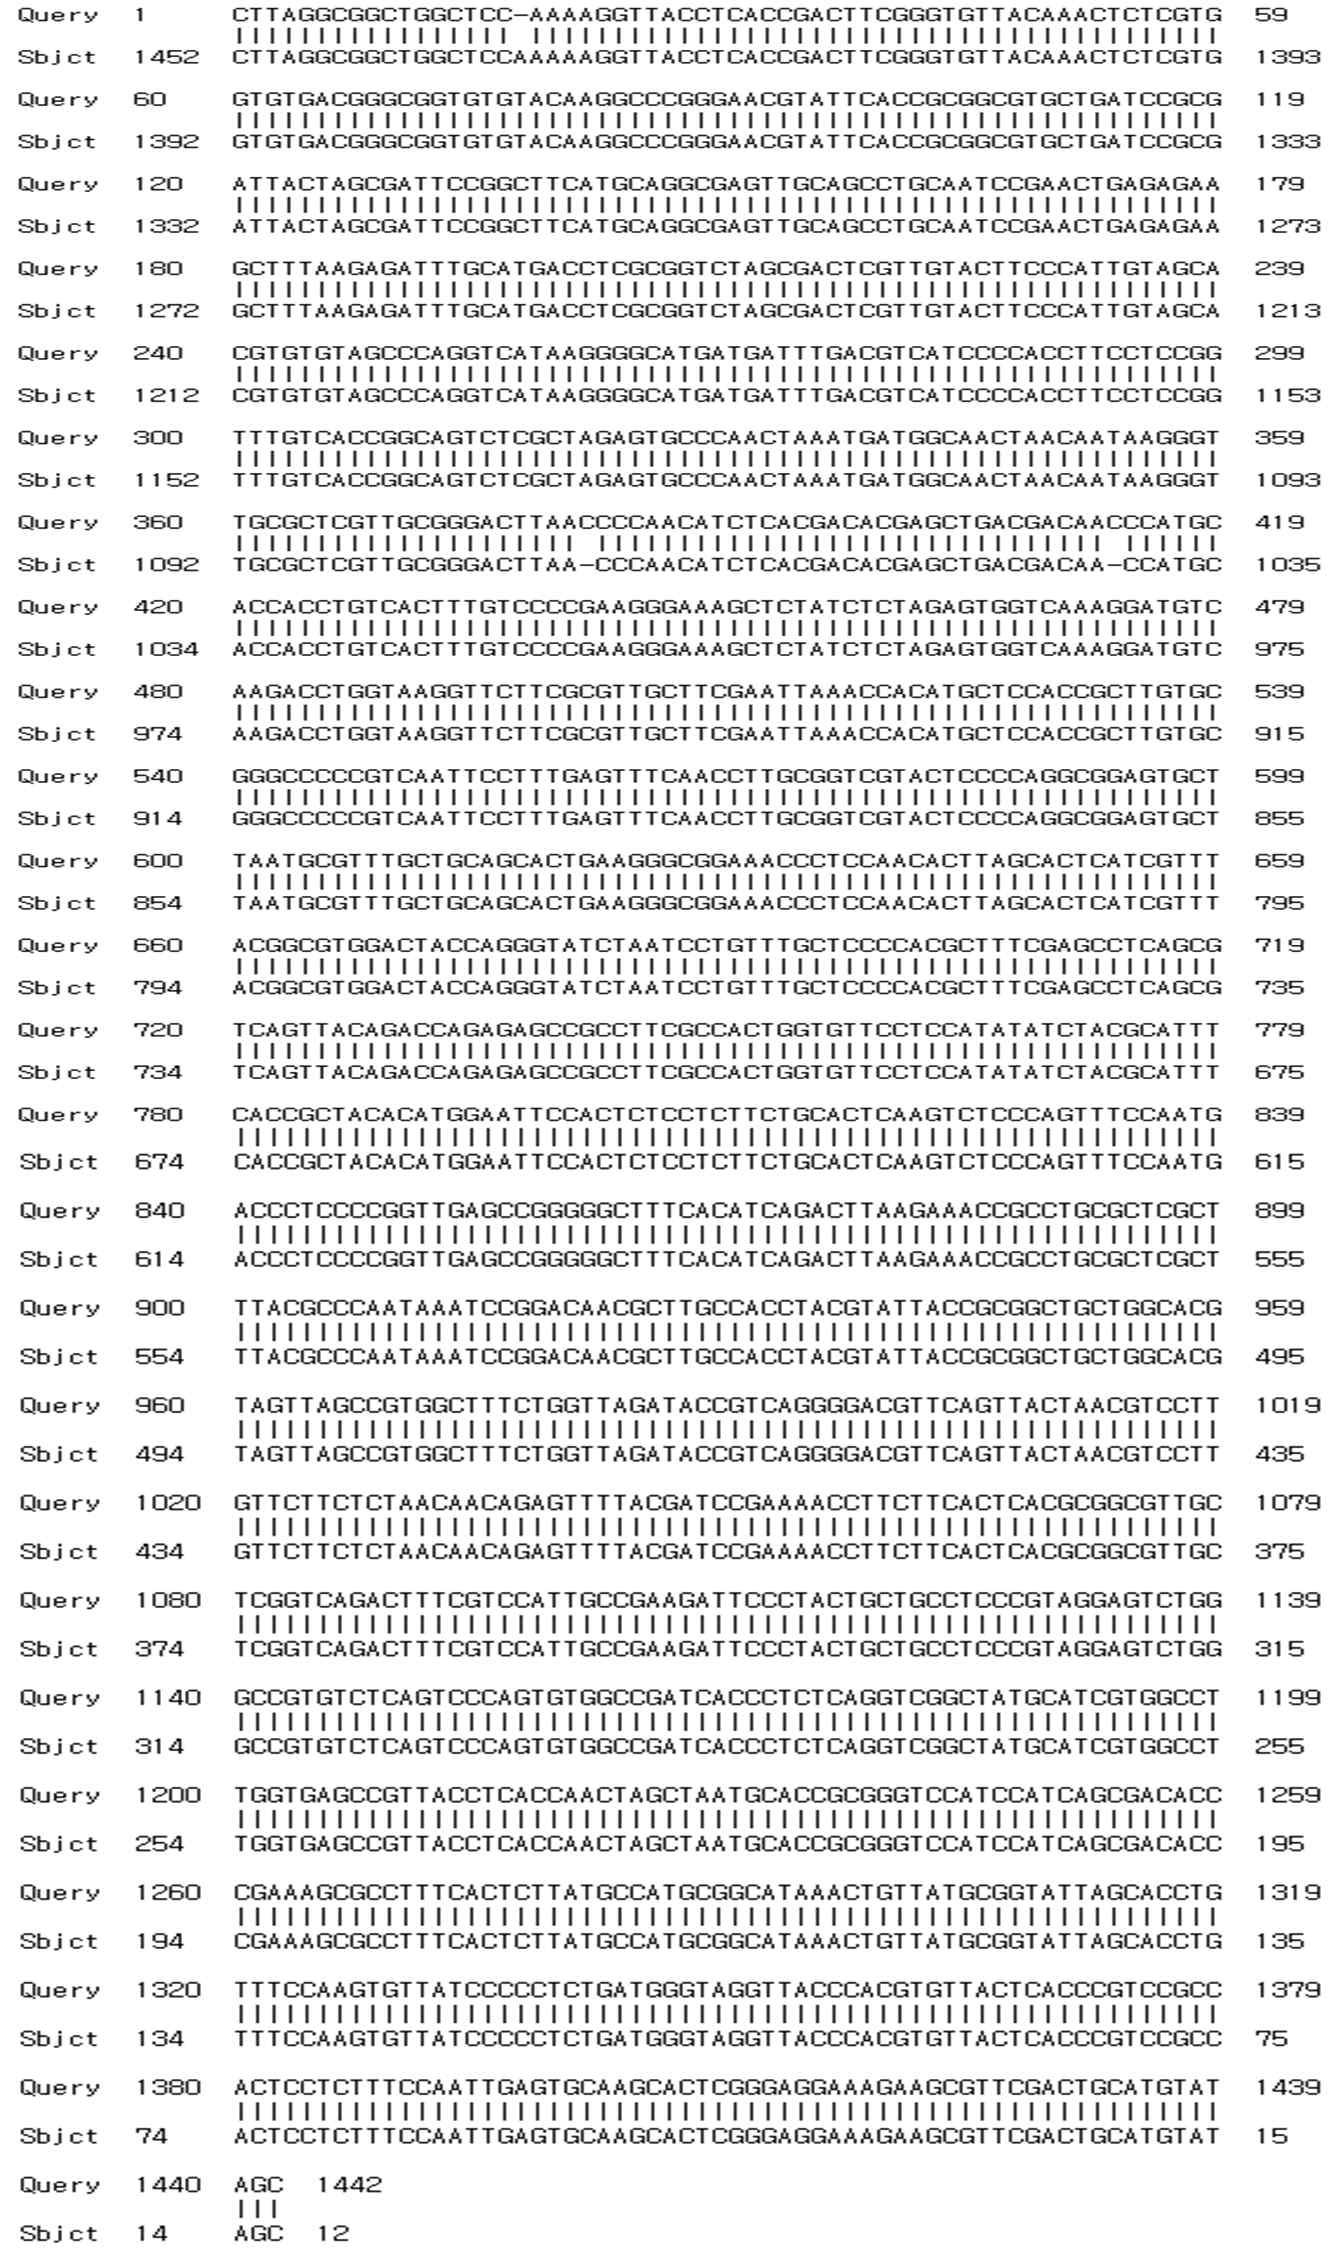 16S rRNA sequencing of C-85 strain